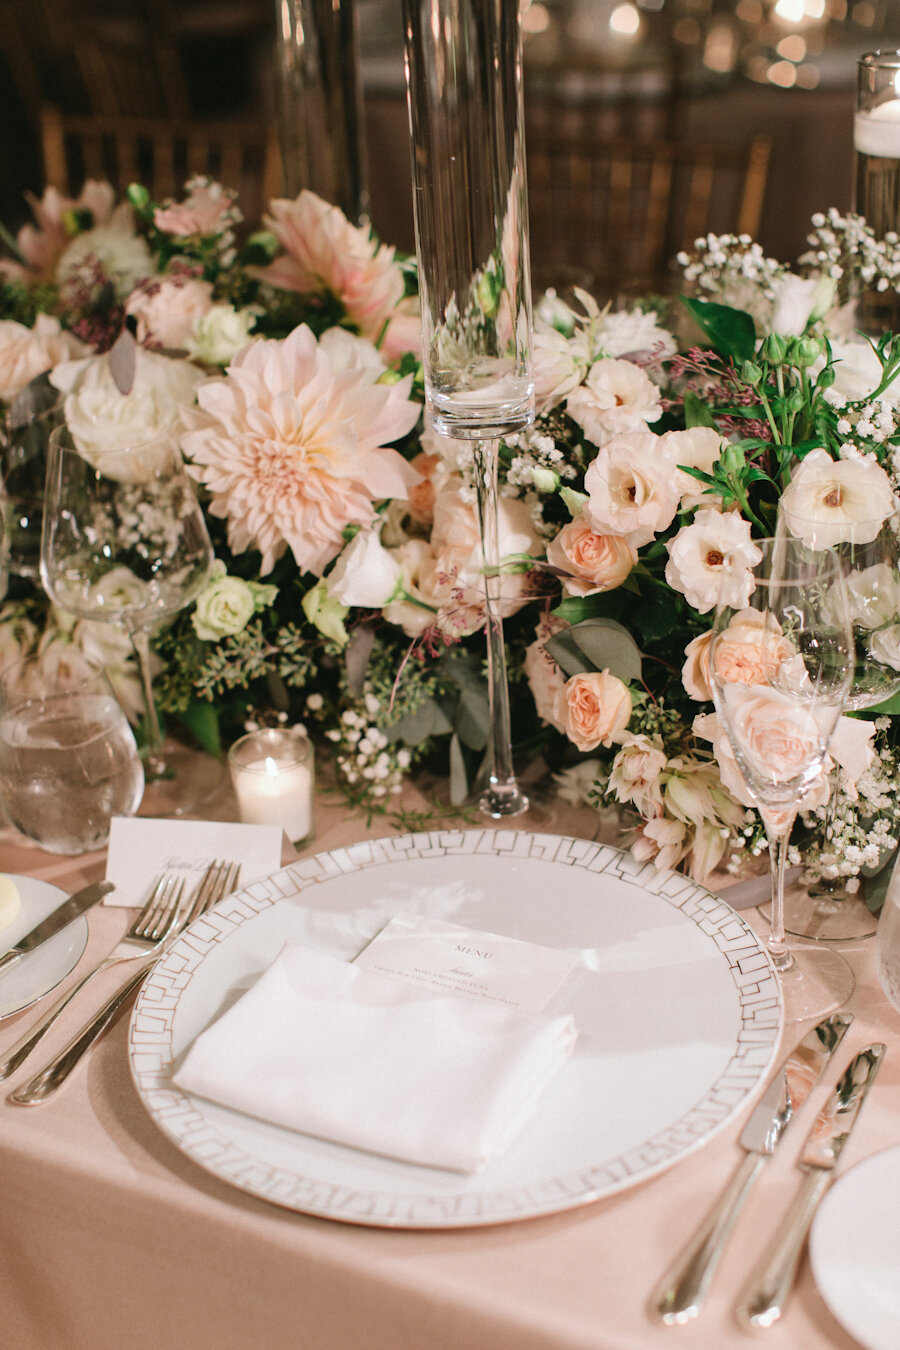 Four Seasons NYC wedding white charger and blush flowers